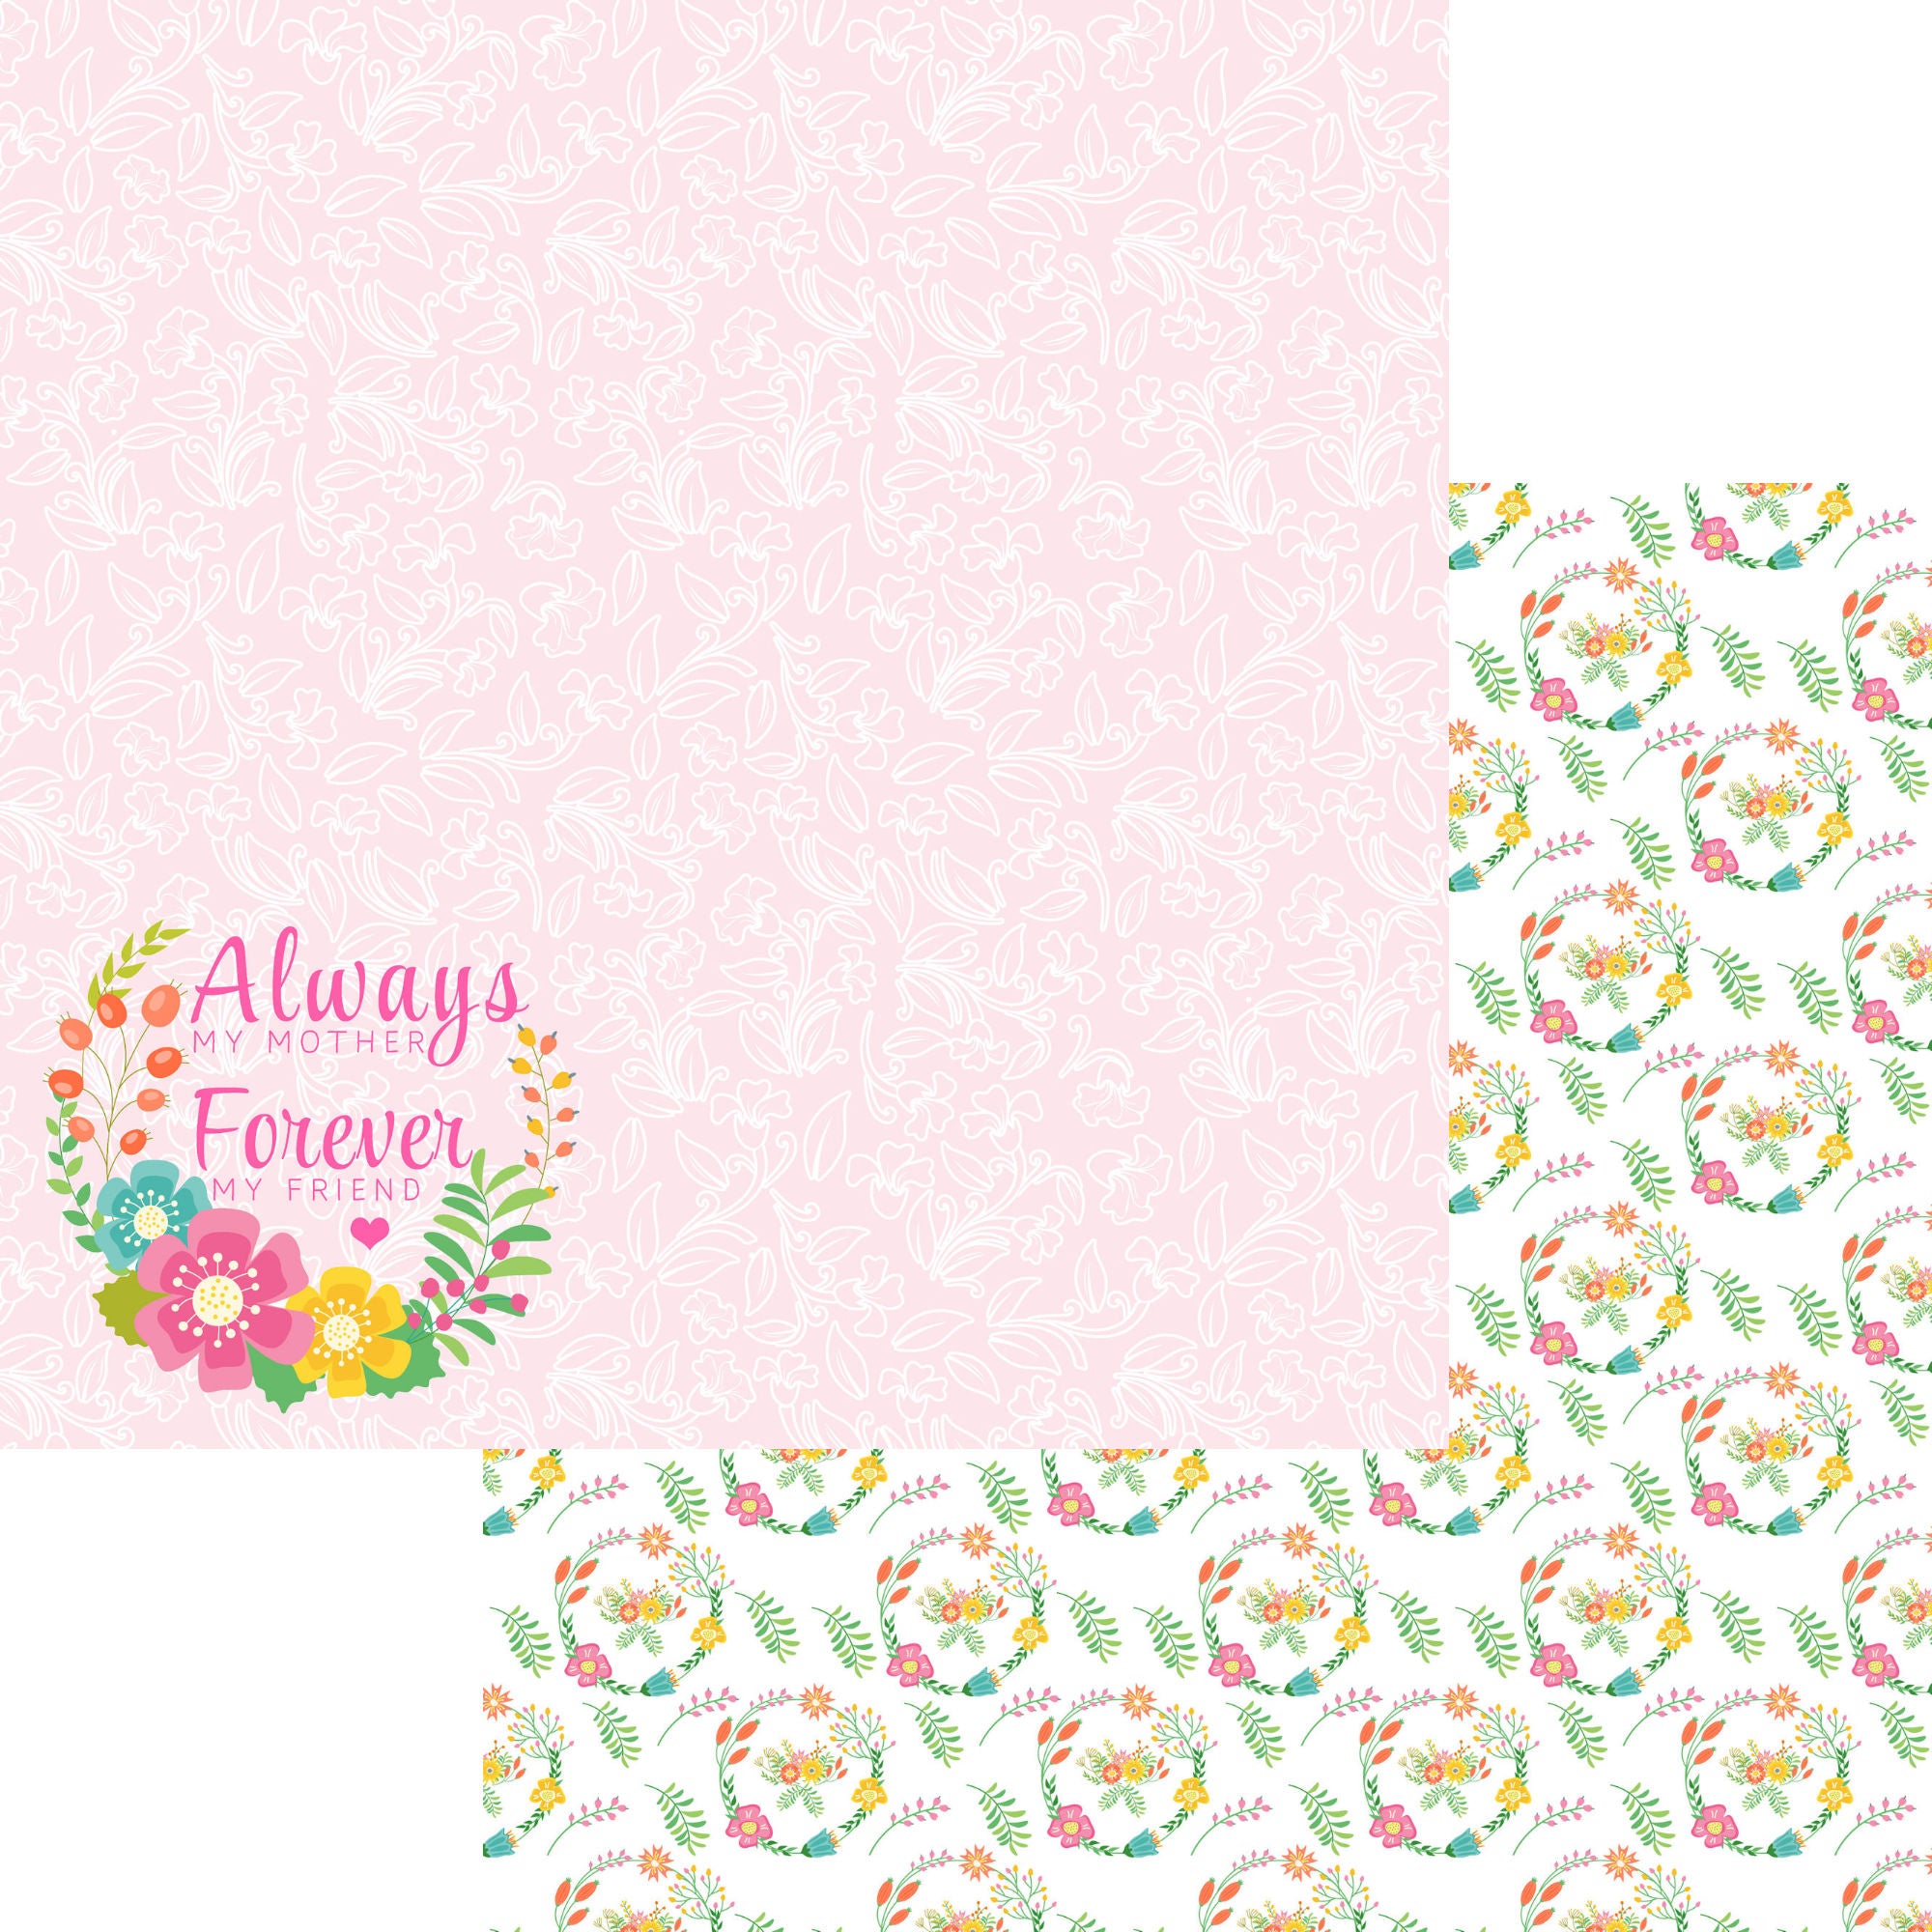 Happy Mother's Day Collection My Mother, My Friend 12 x 12 Double-Sided Scrapbook Paper by SSC Designs